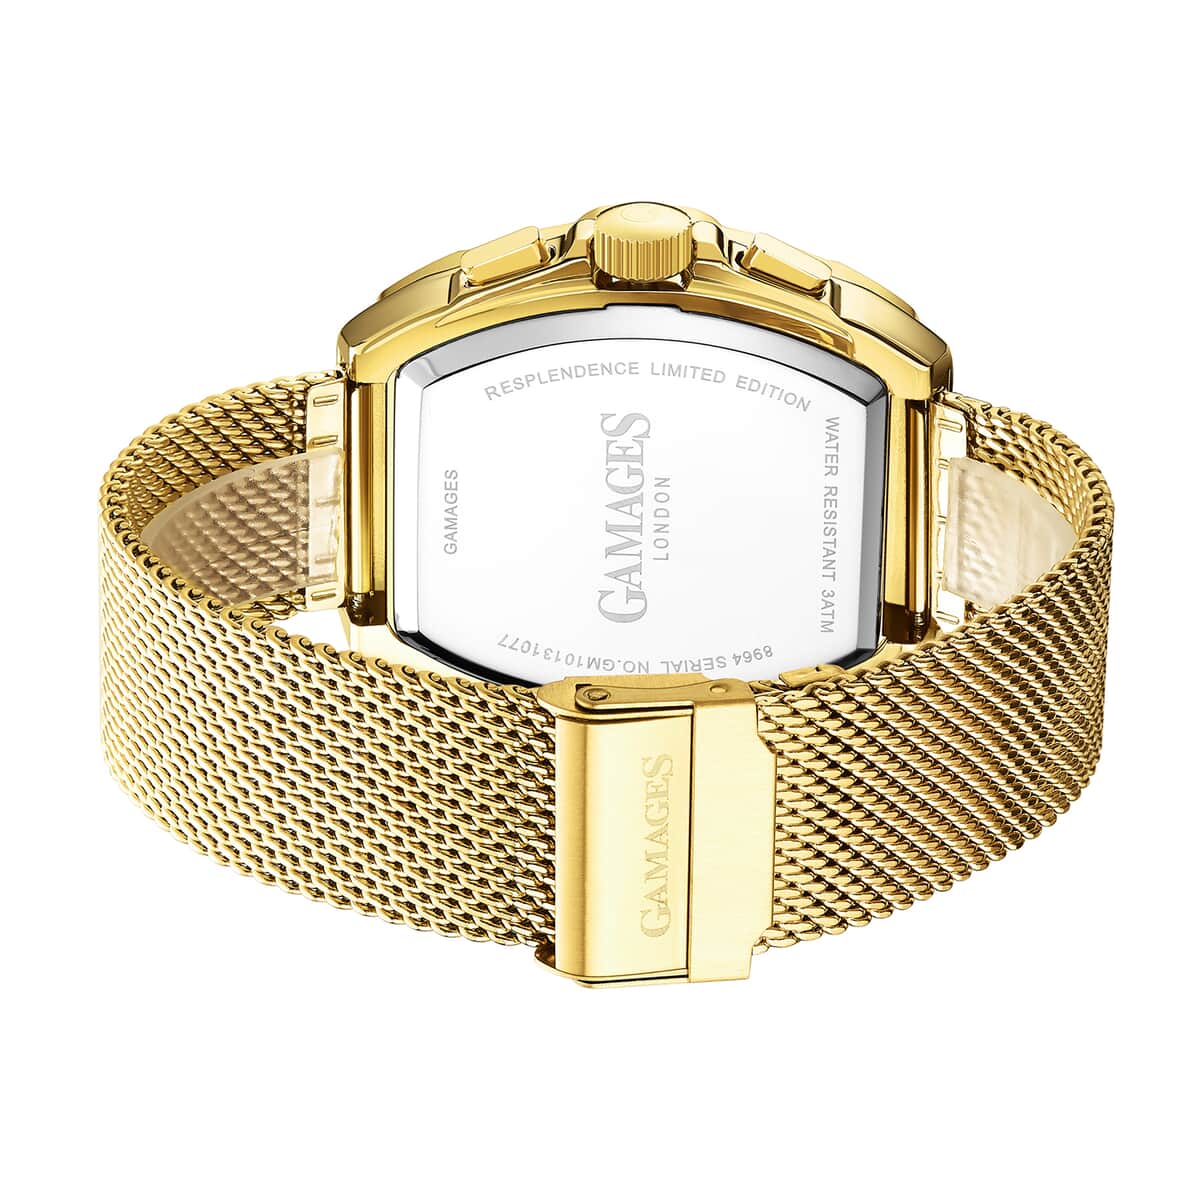 GAMAGES OF LONDON Limited Edition Hand Assembled Resplendence Automatic Movement Mesh Strap Watch in ION Plated Gold with Brown Dial (41mm) image number 3